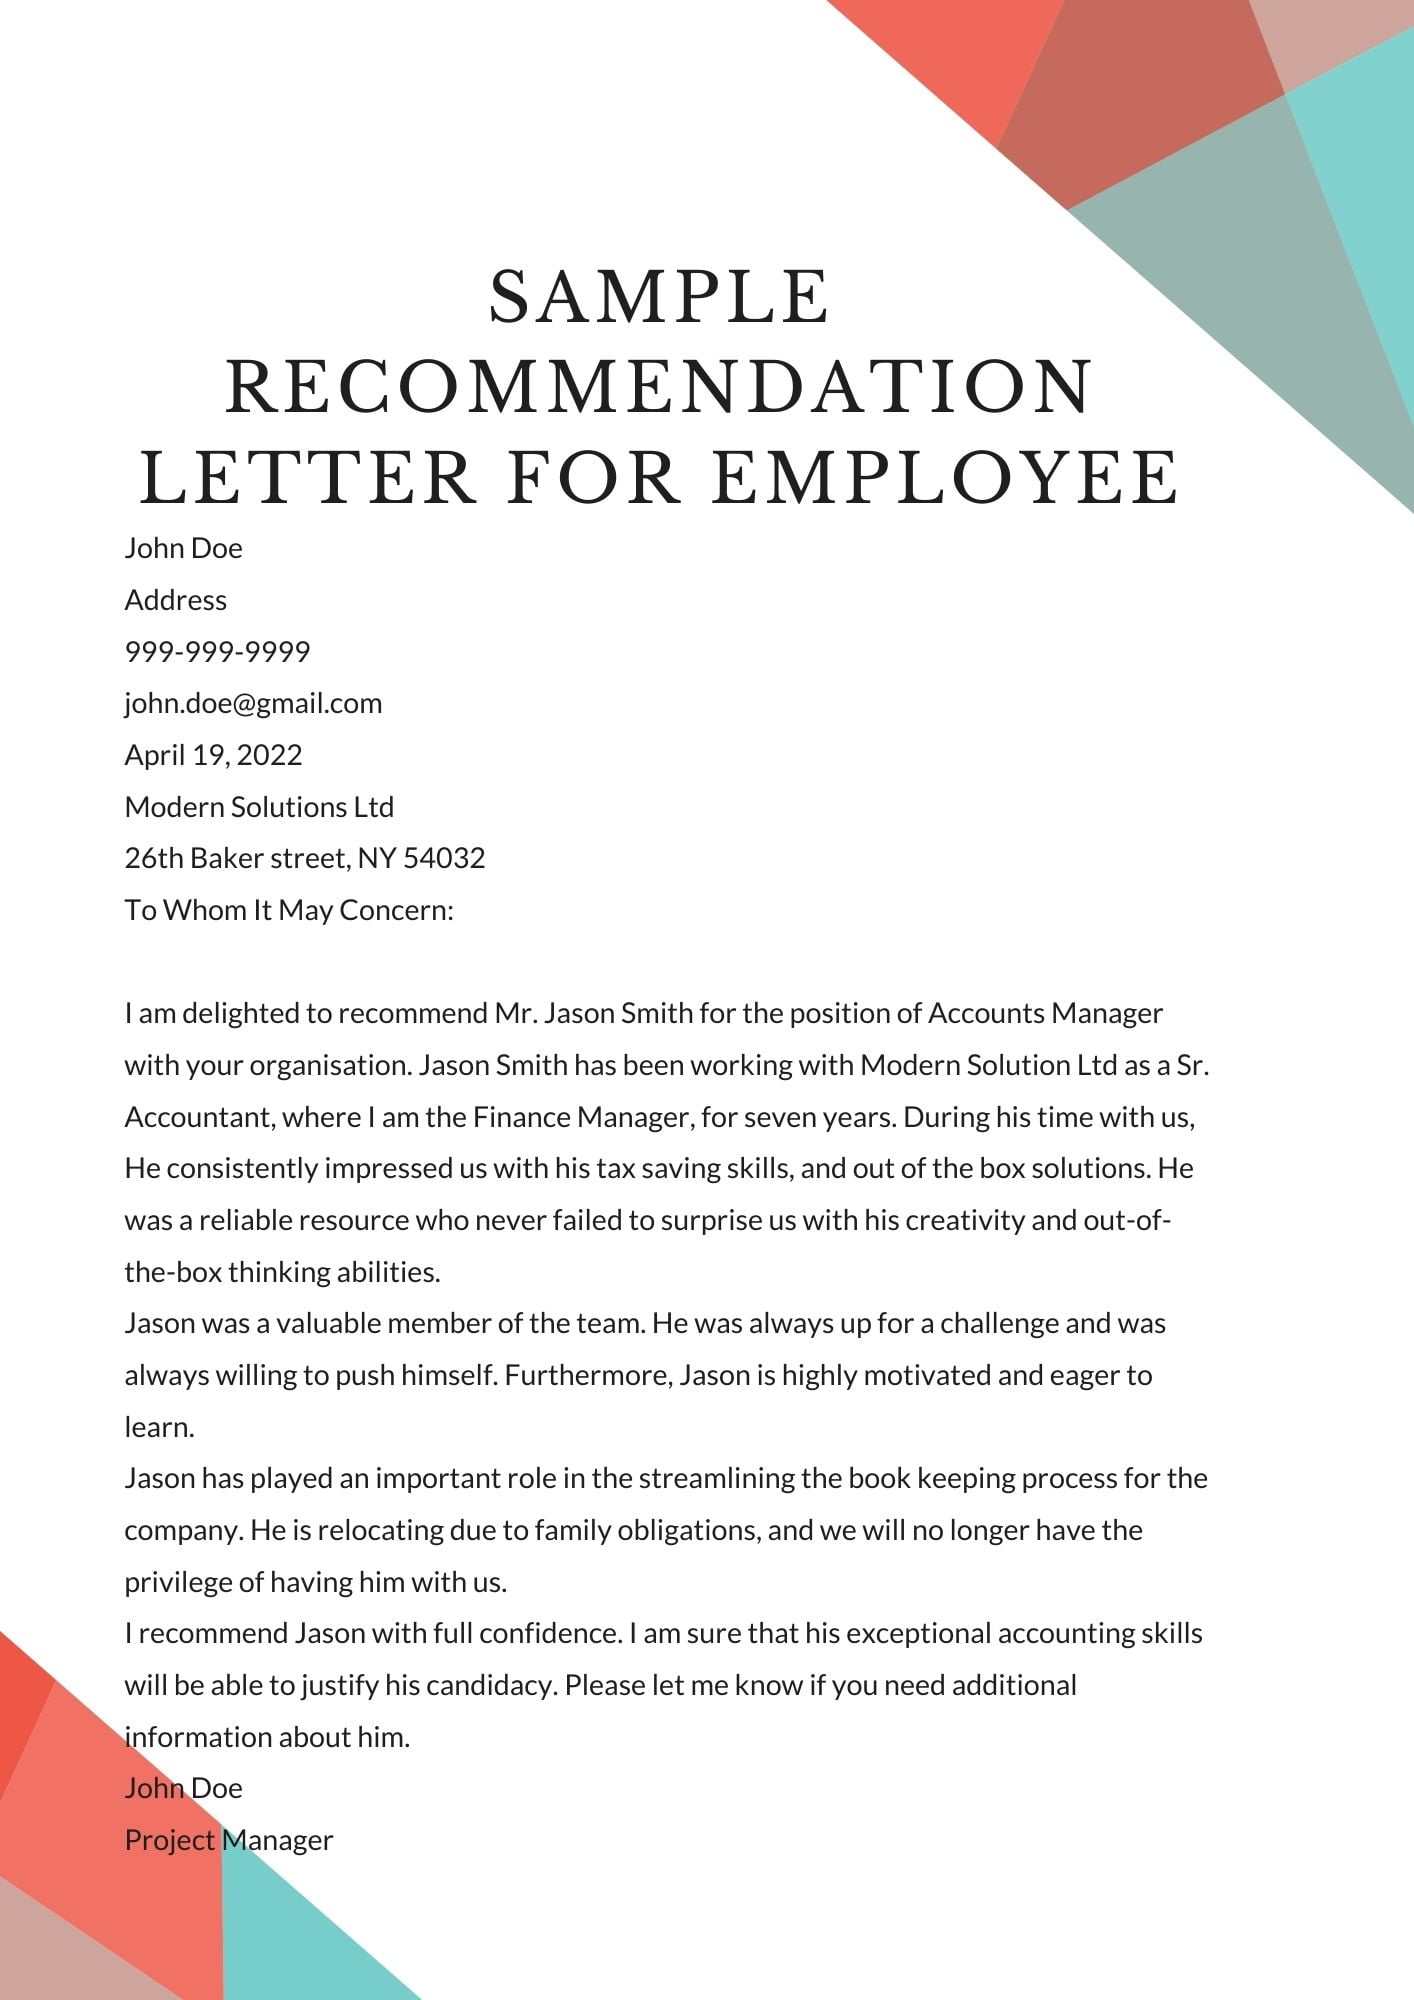 how to mention employee referral in cover letter